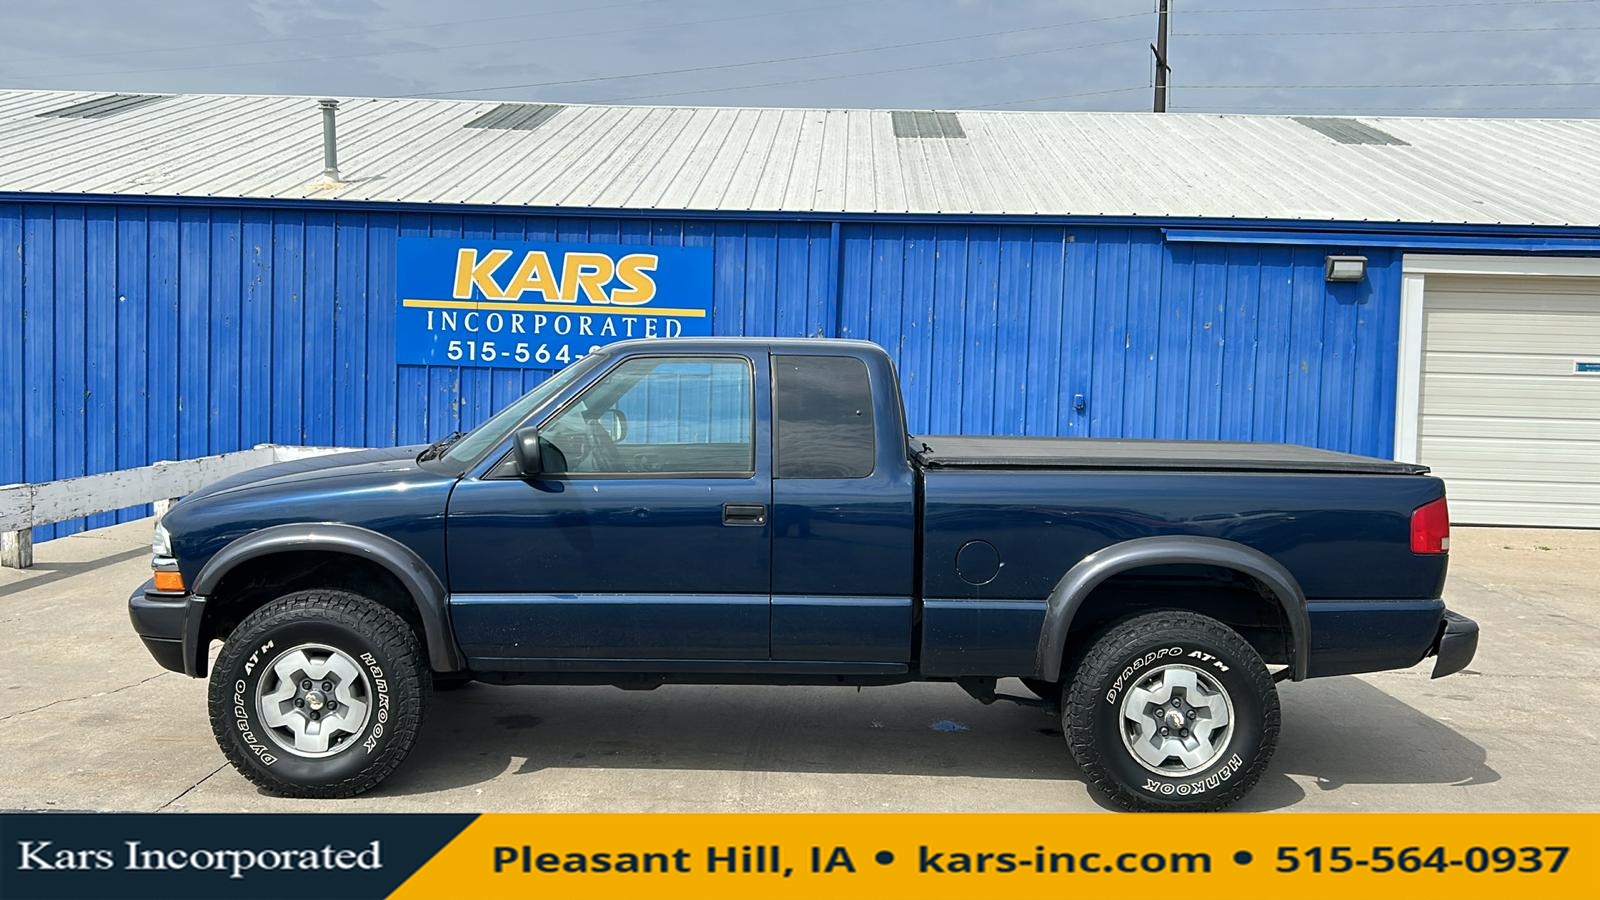 2001 Chevrolet S10 S10 4WD Extended Cab  - 176698P  - Kars Incorporated